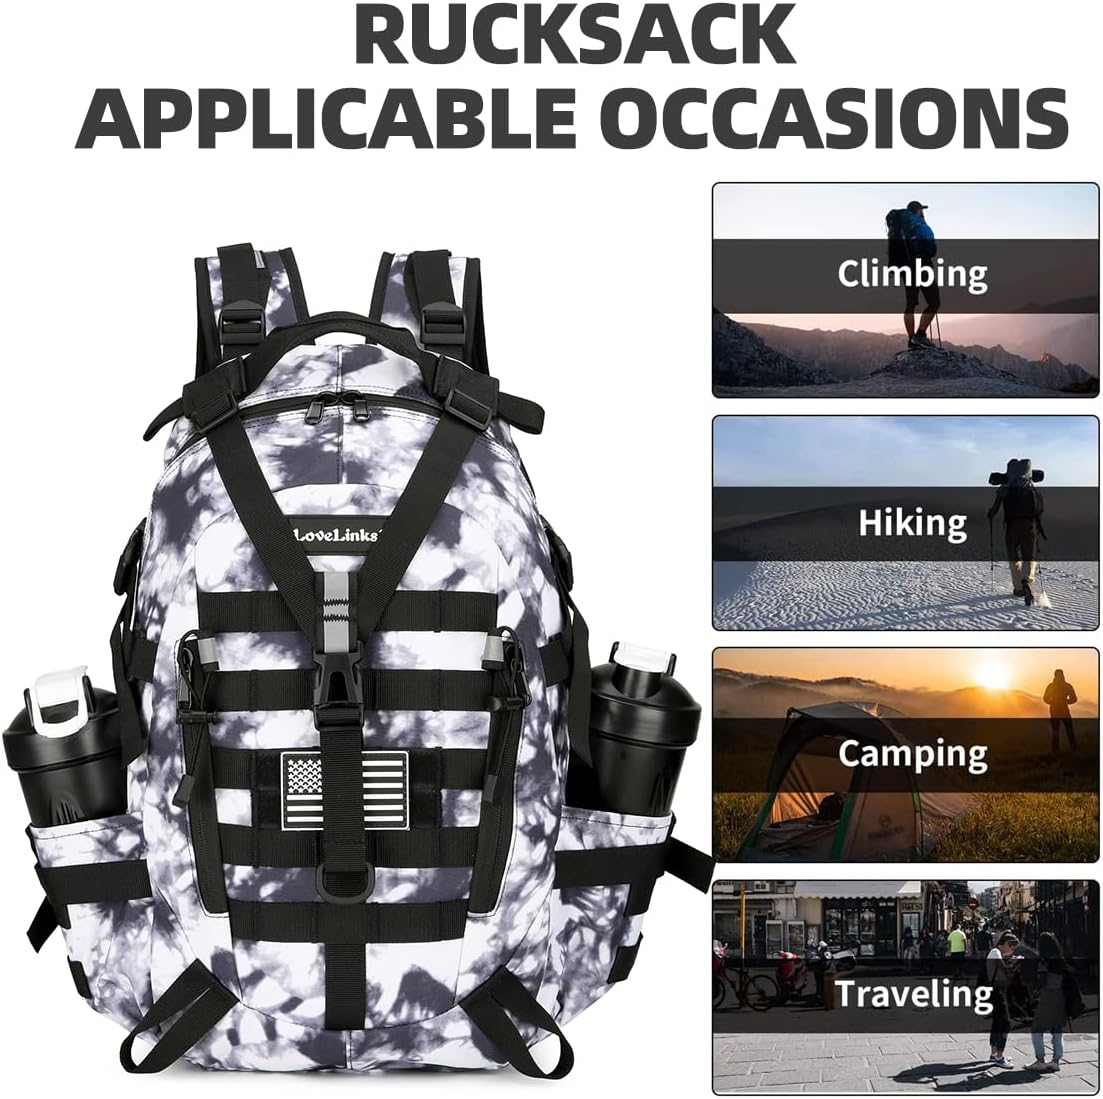 Lovelinks21 25L Tactical Backpack Hiking Daypacks Outdoor Military Molle Bag EDC Rucksack Motorcycle Backpack for Camping